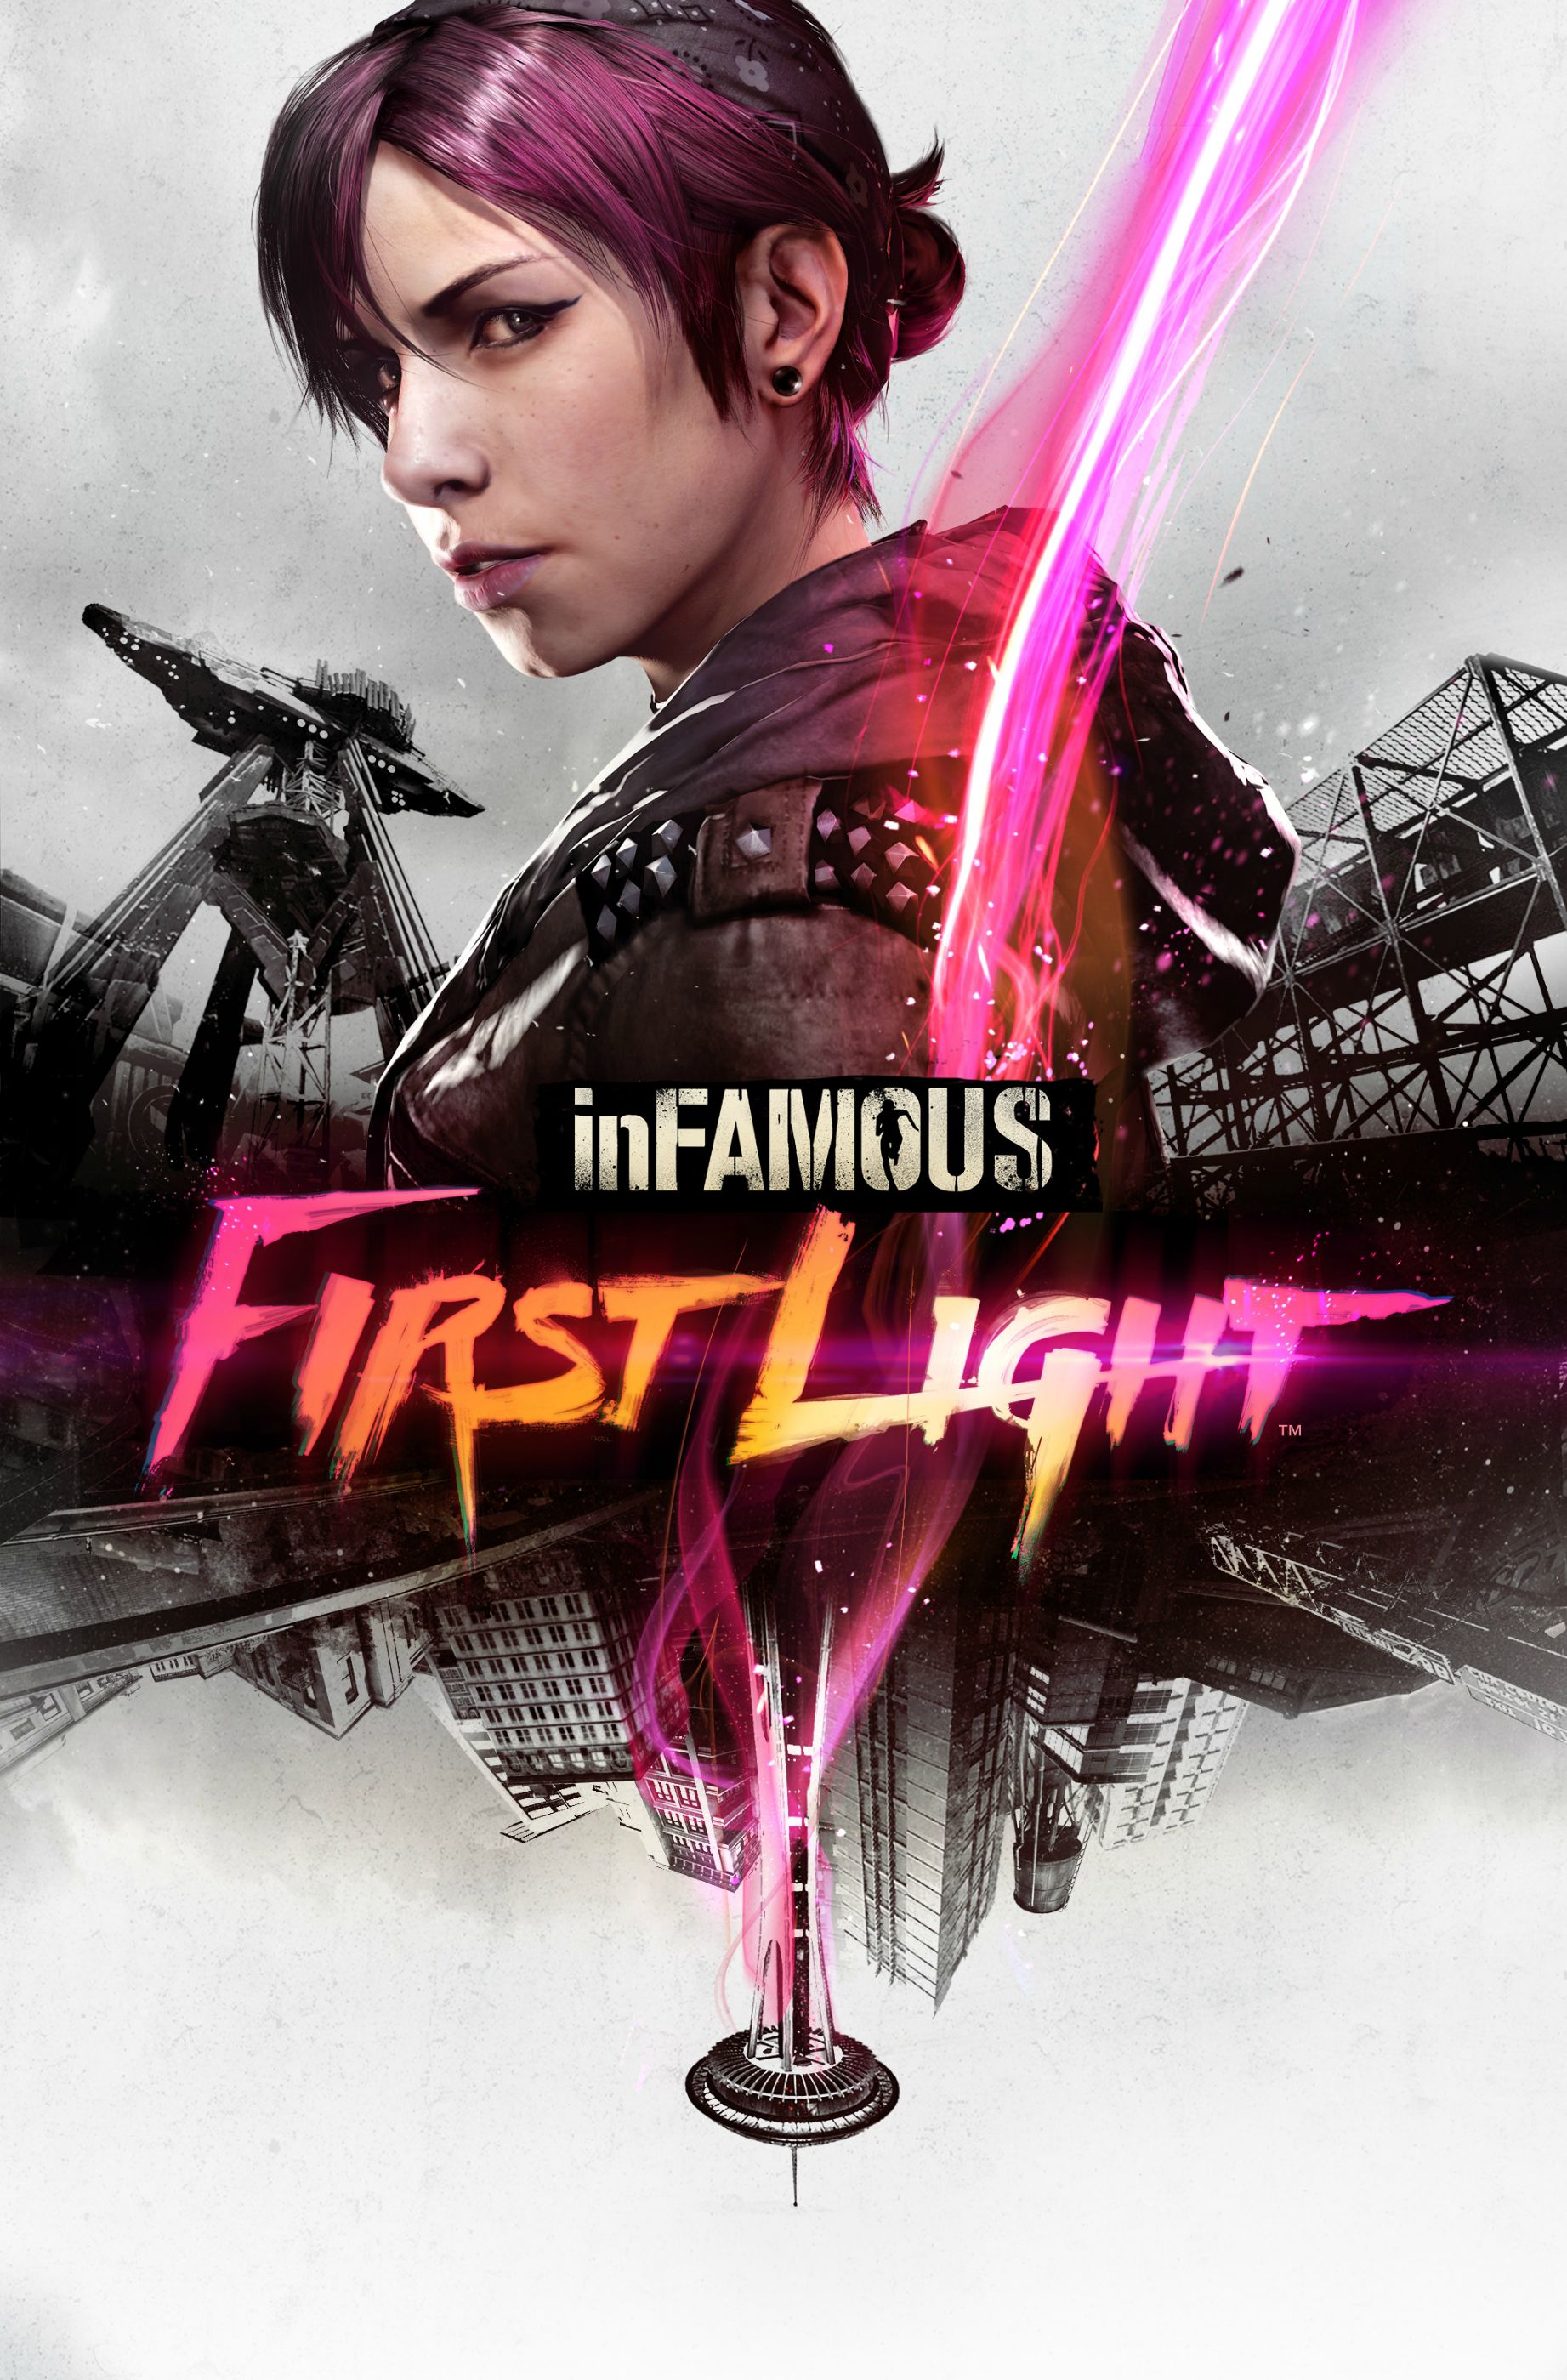 is infamous first light worth it